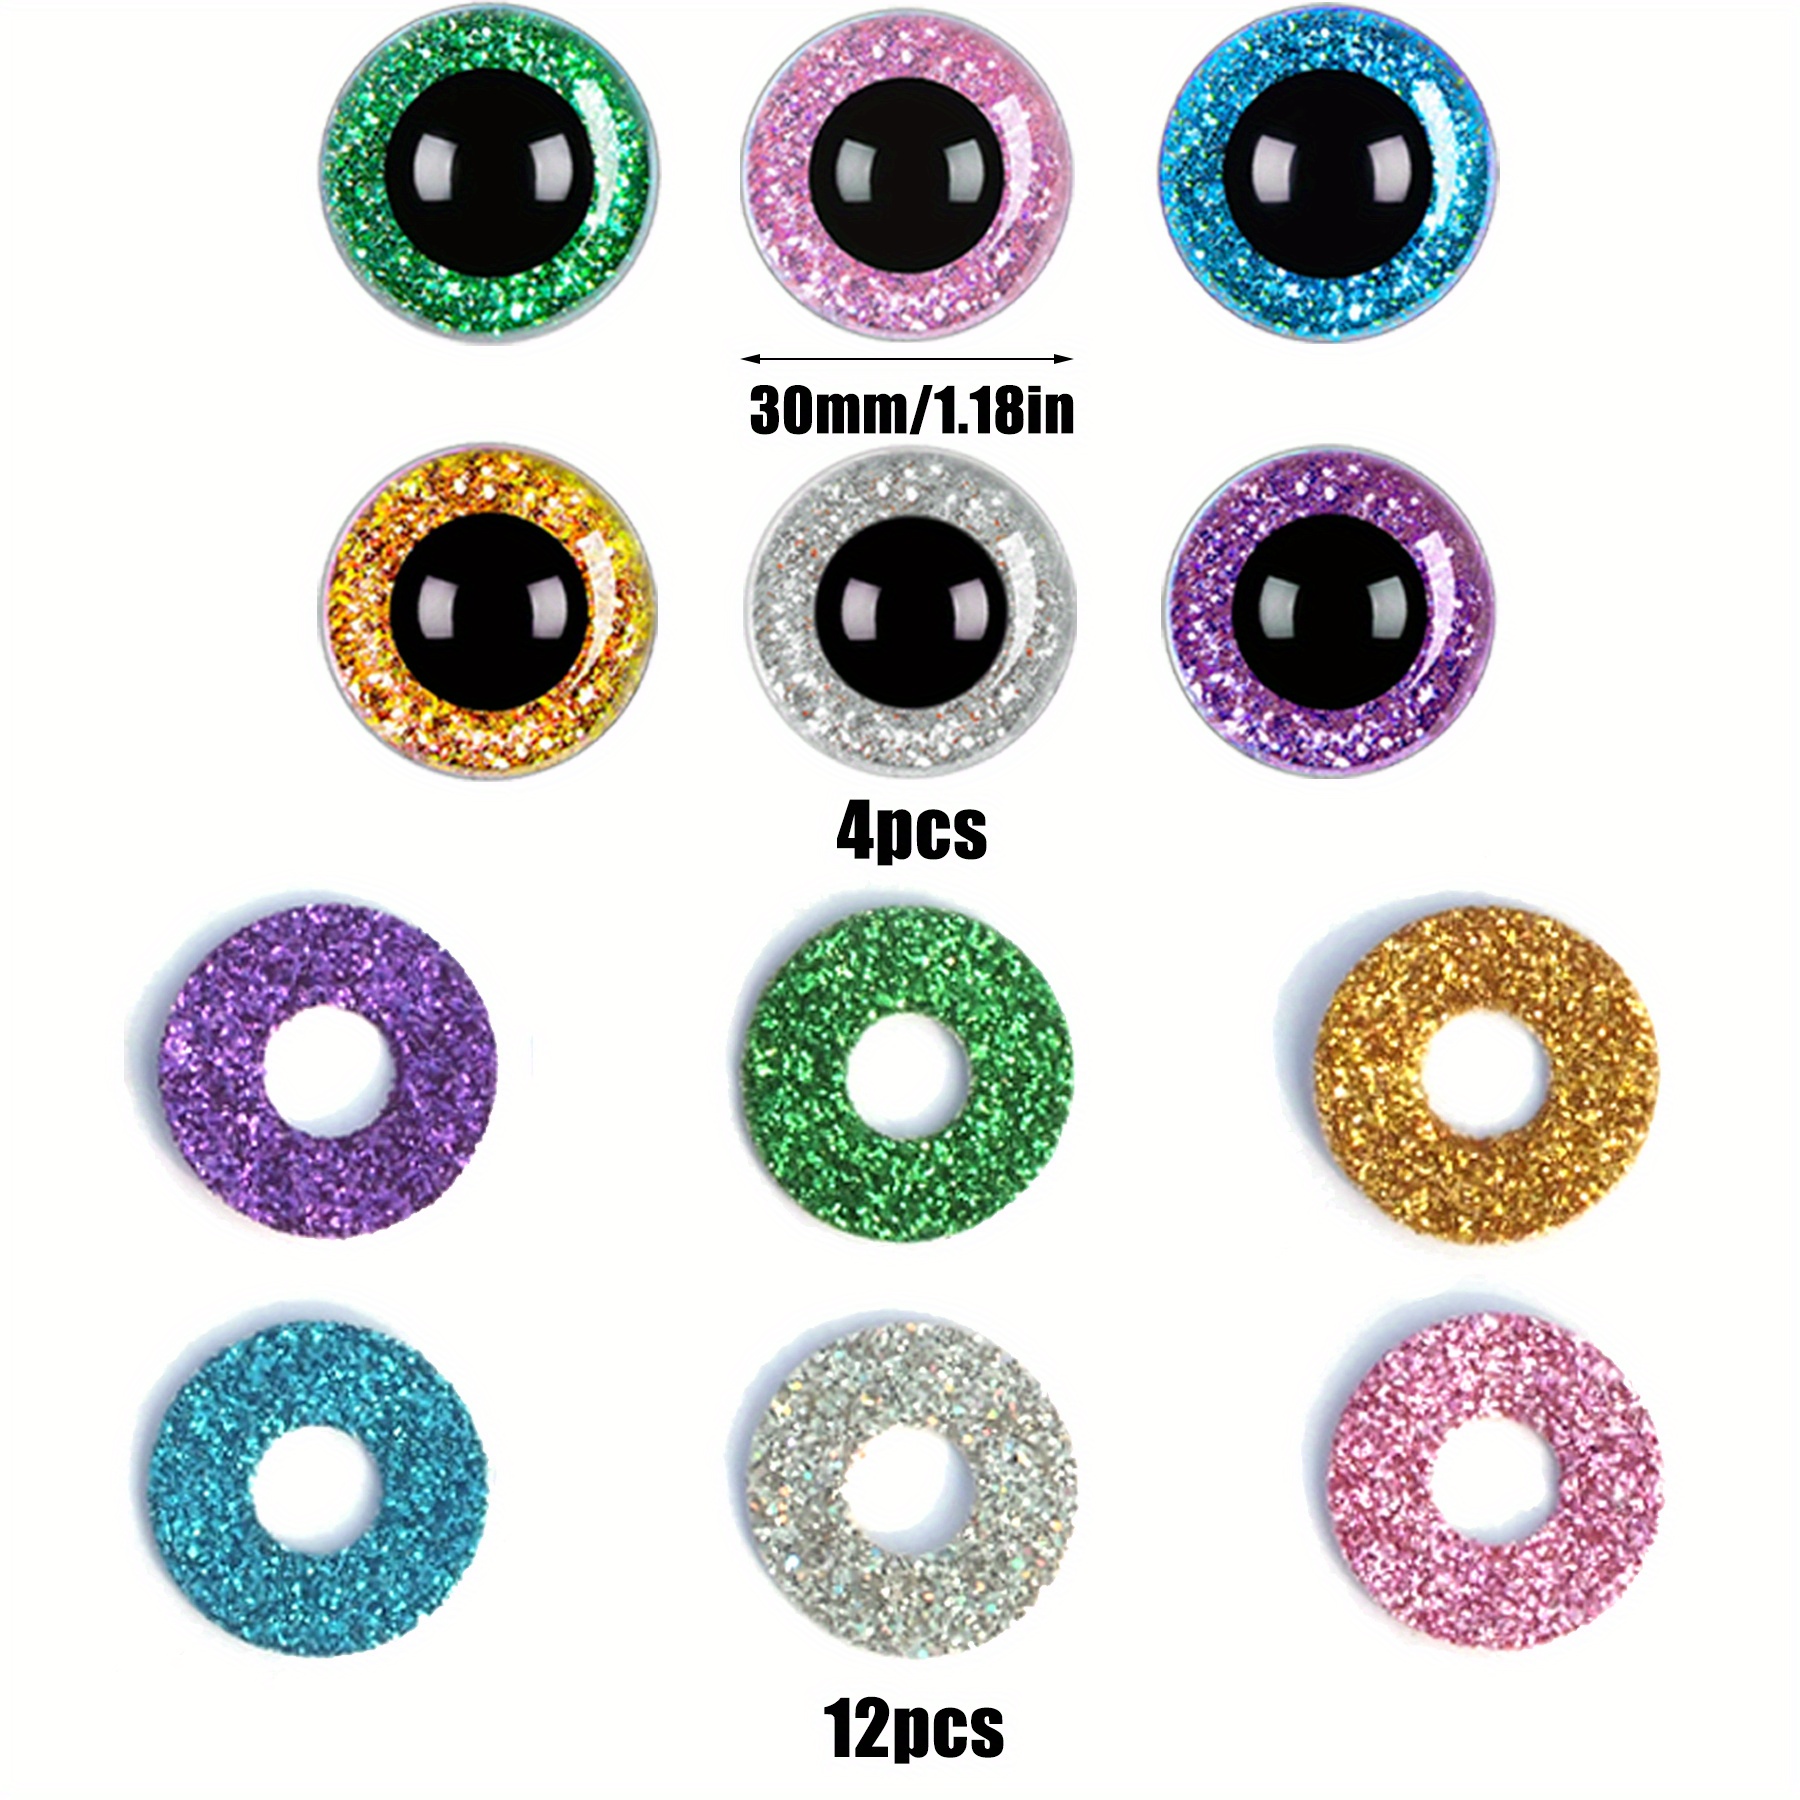 35mm Cleartrapezoid Plastic Safety Eyes With A Fuchsia Frost Glitter  Non-Woven Slip Iris & Washers 1 Pair - Amigurumi/3D Toys Craft - Yahoo  Shopping